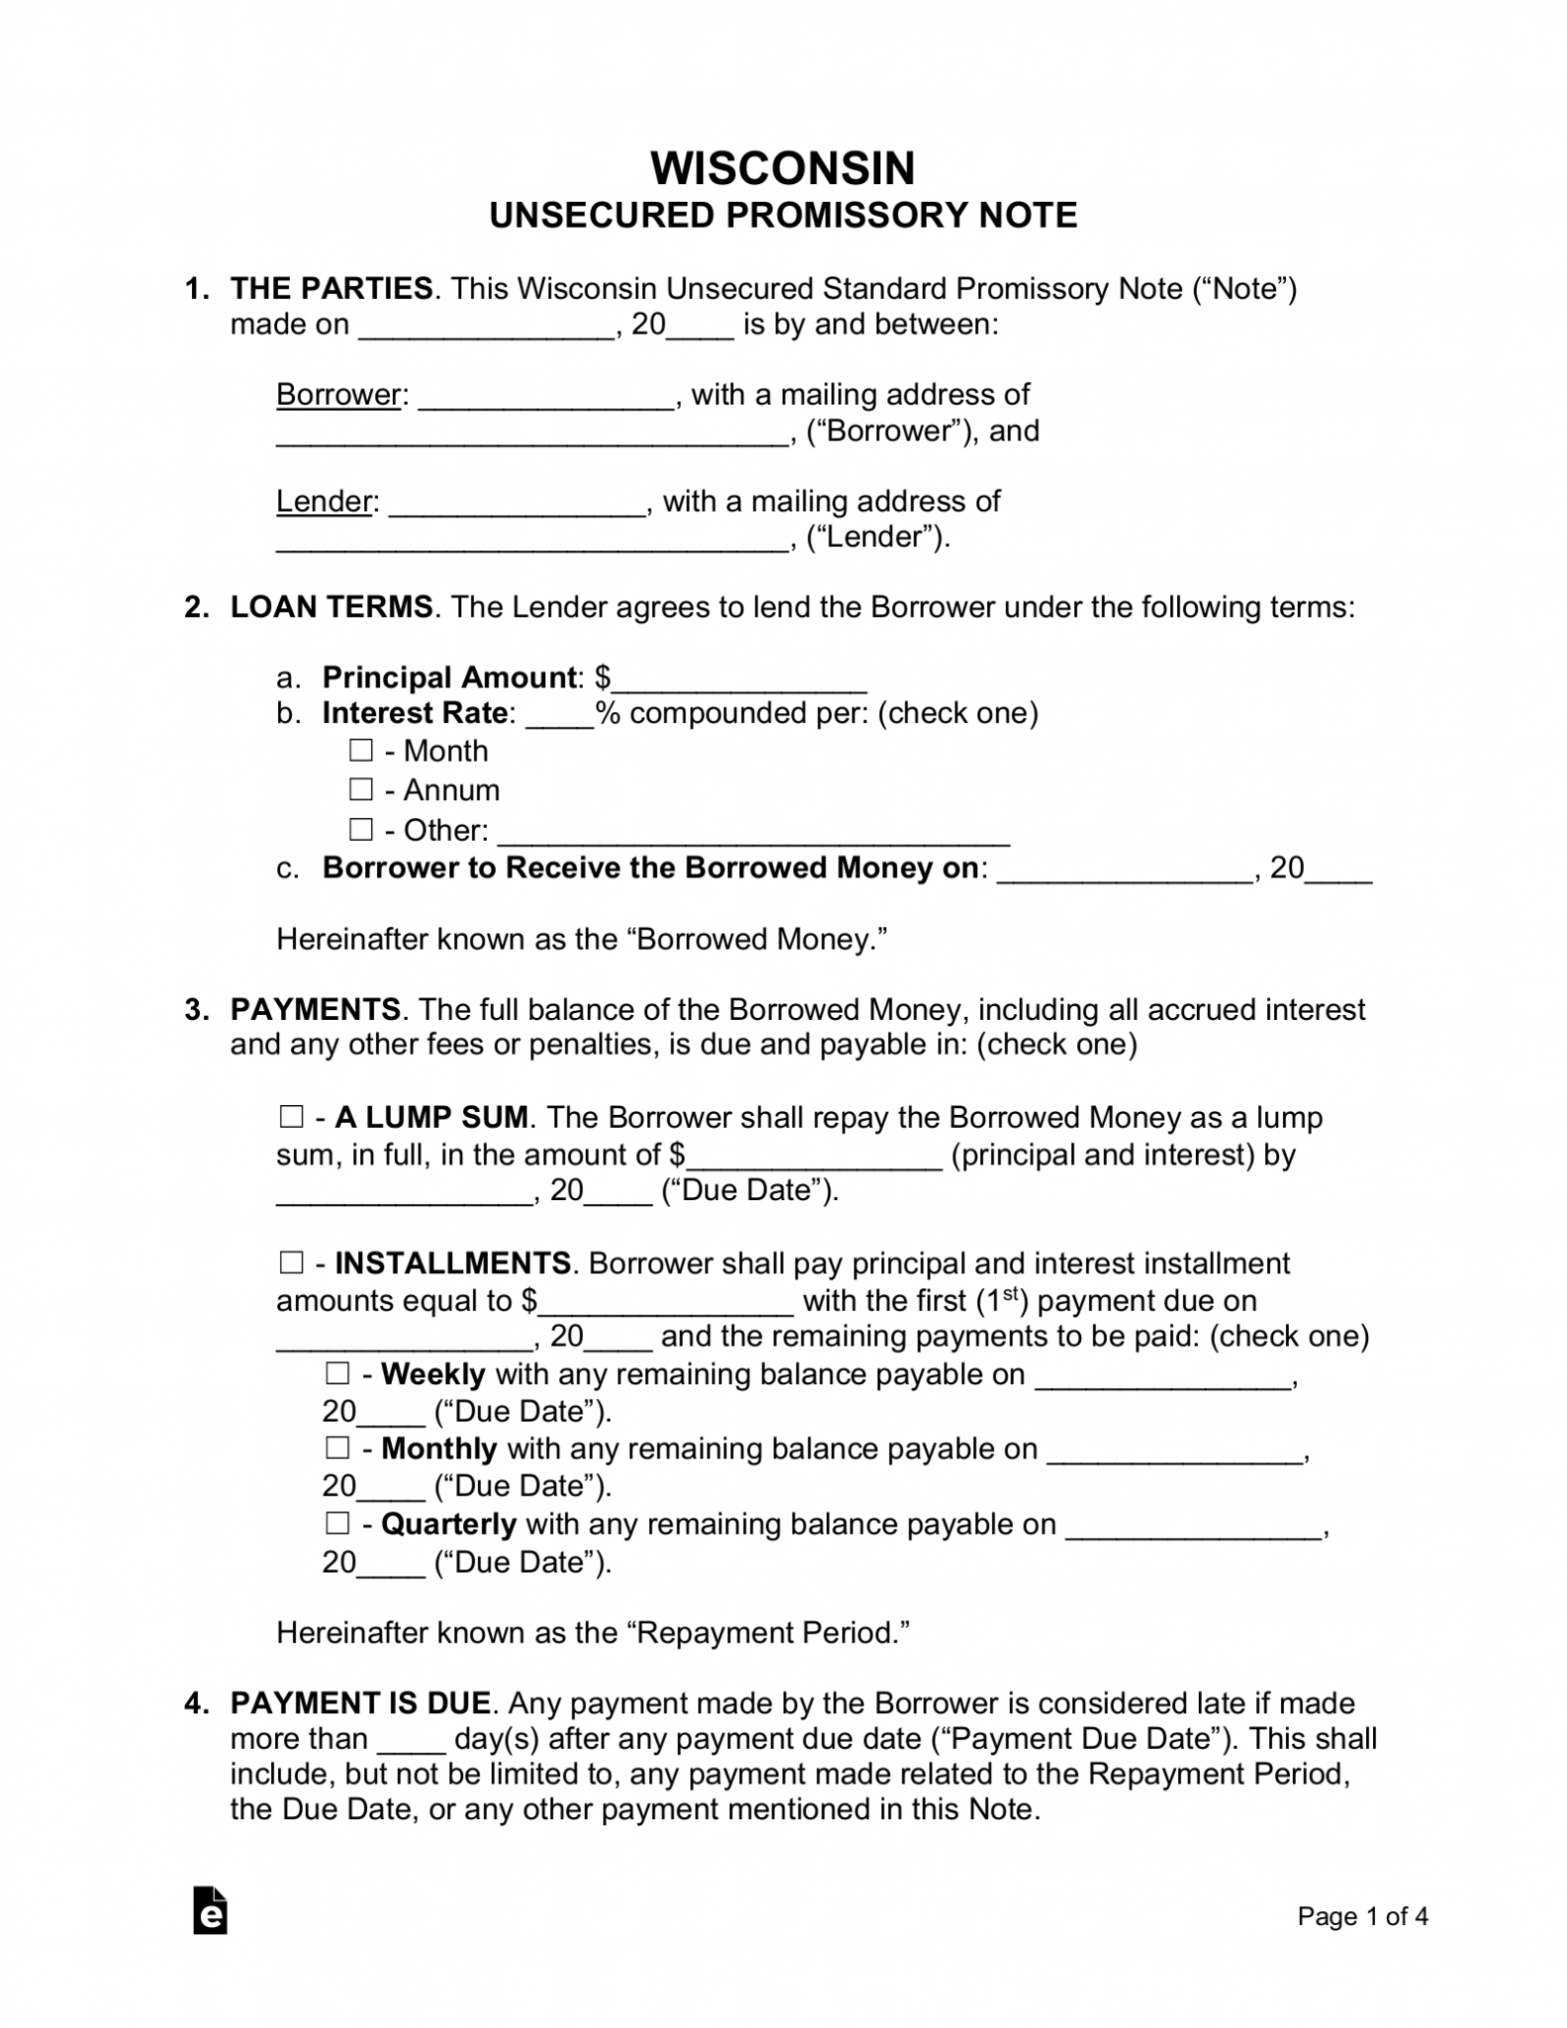 Free Wisconsin Unsecured Promissory Note Template – Pdf | Word – Eforms Throughout Promisorry Note Template